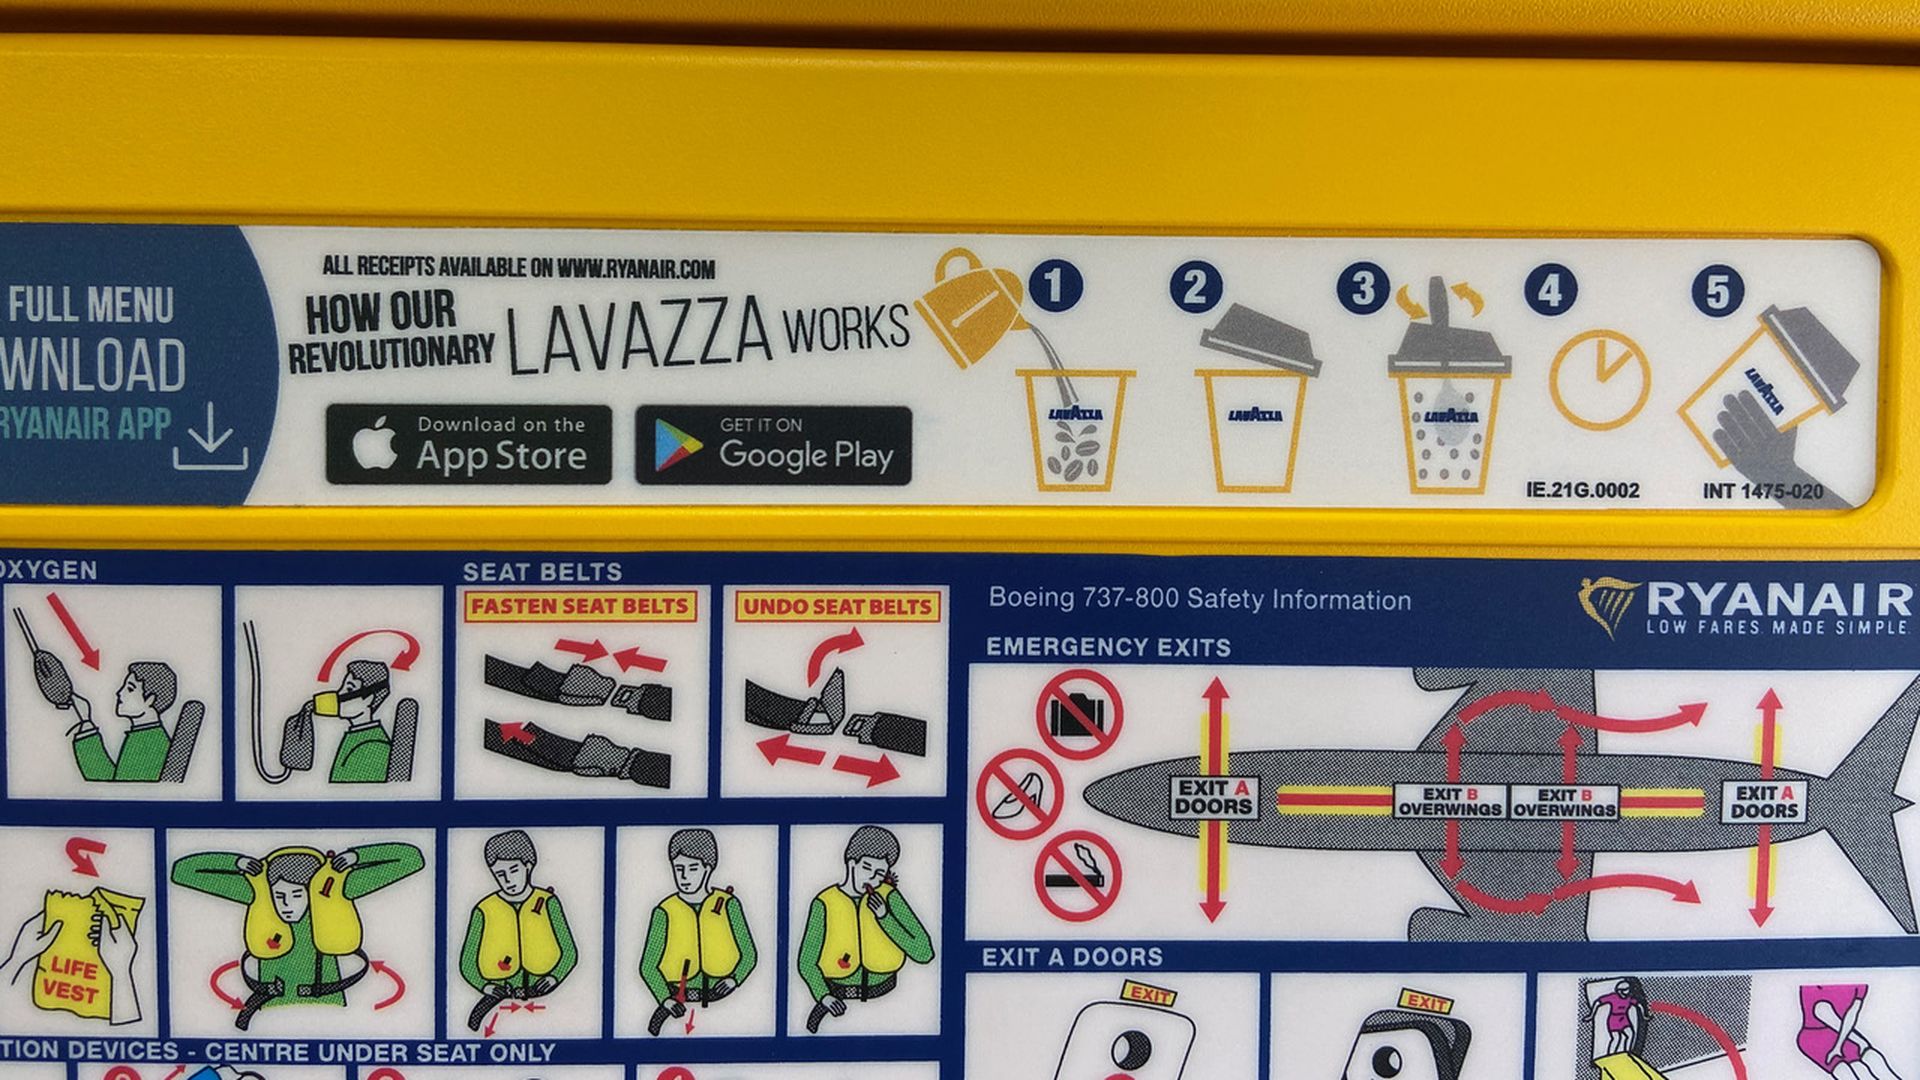 Instructions on a Ryanair plane about how to make coffee.